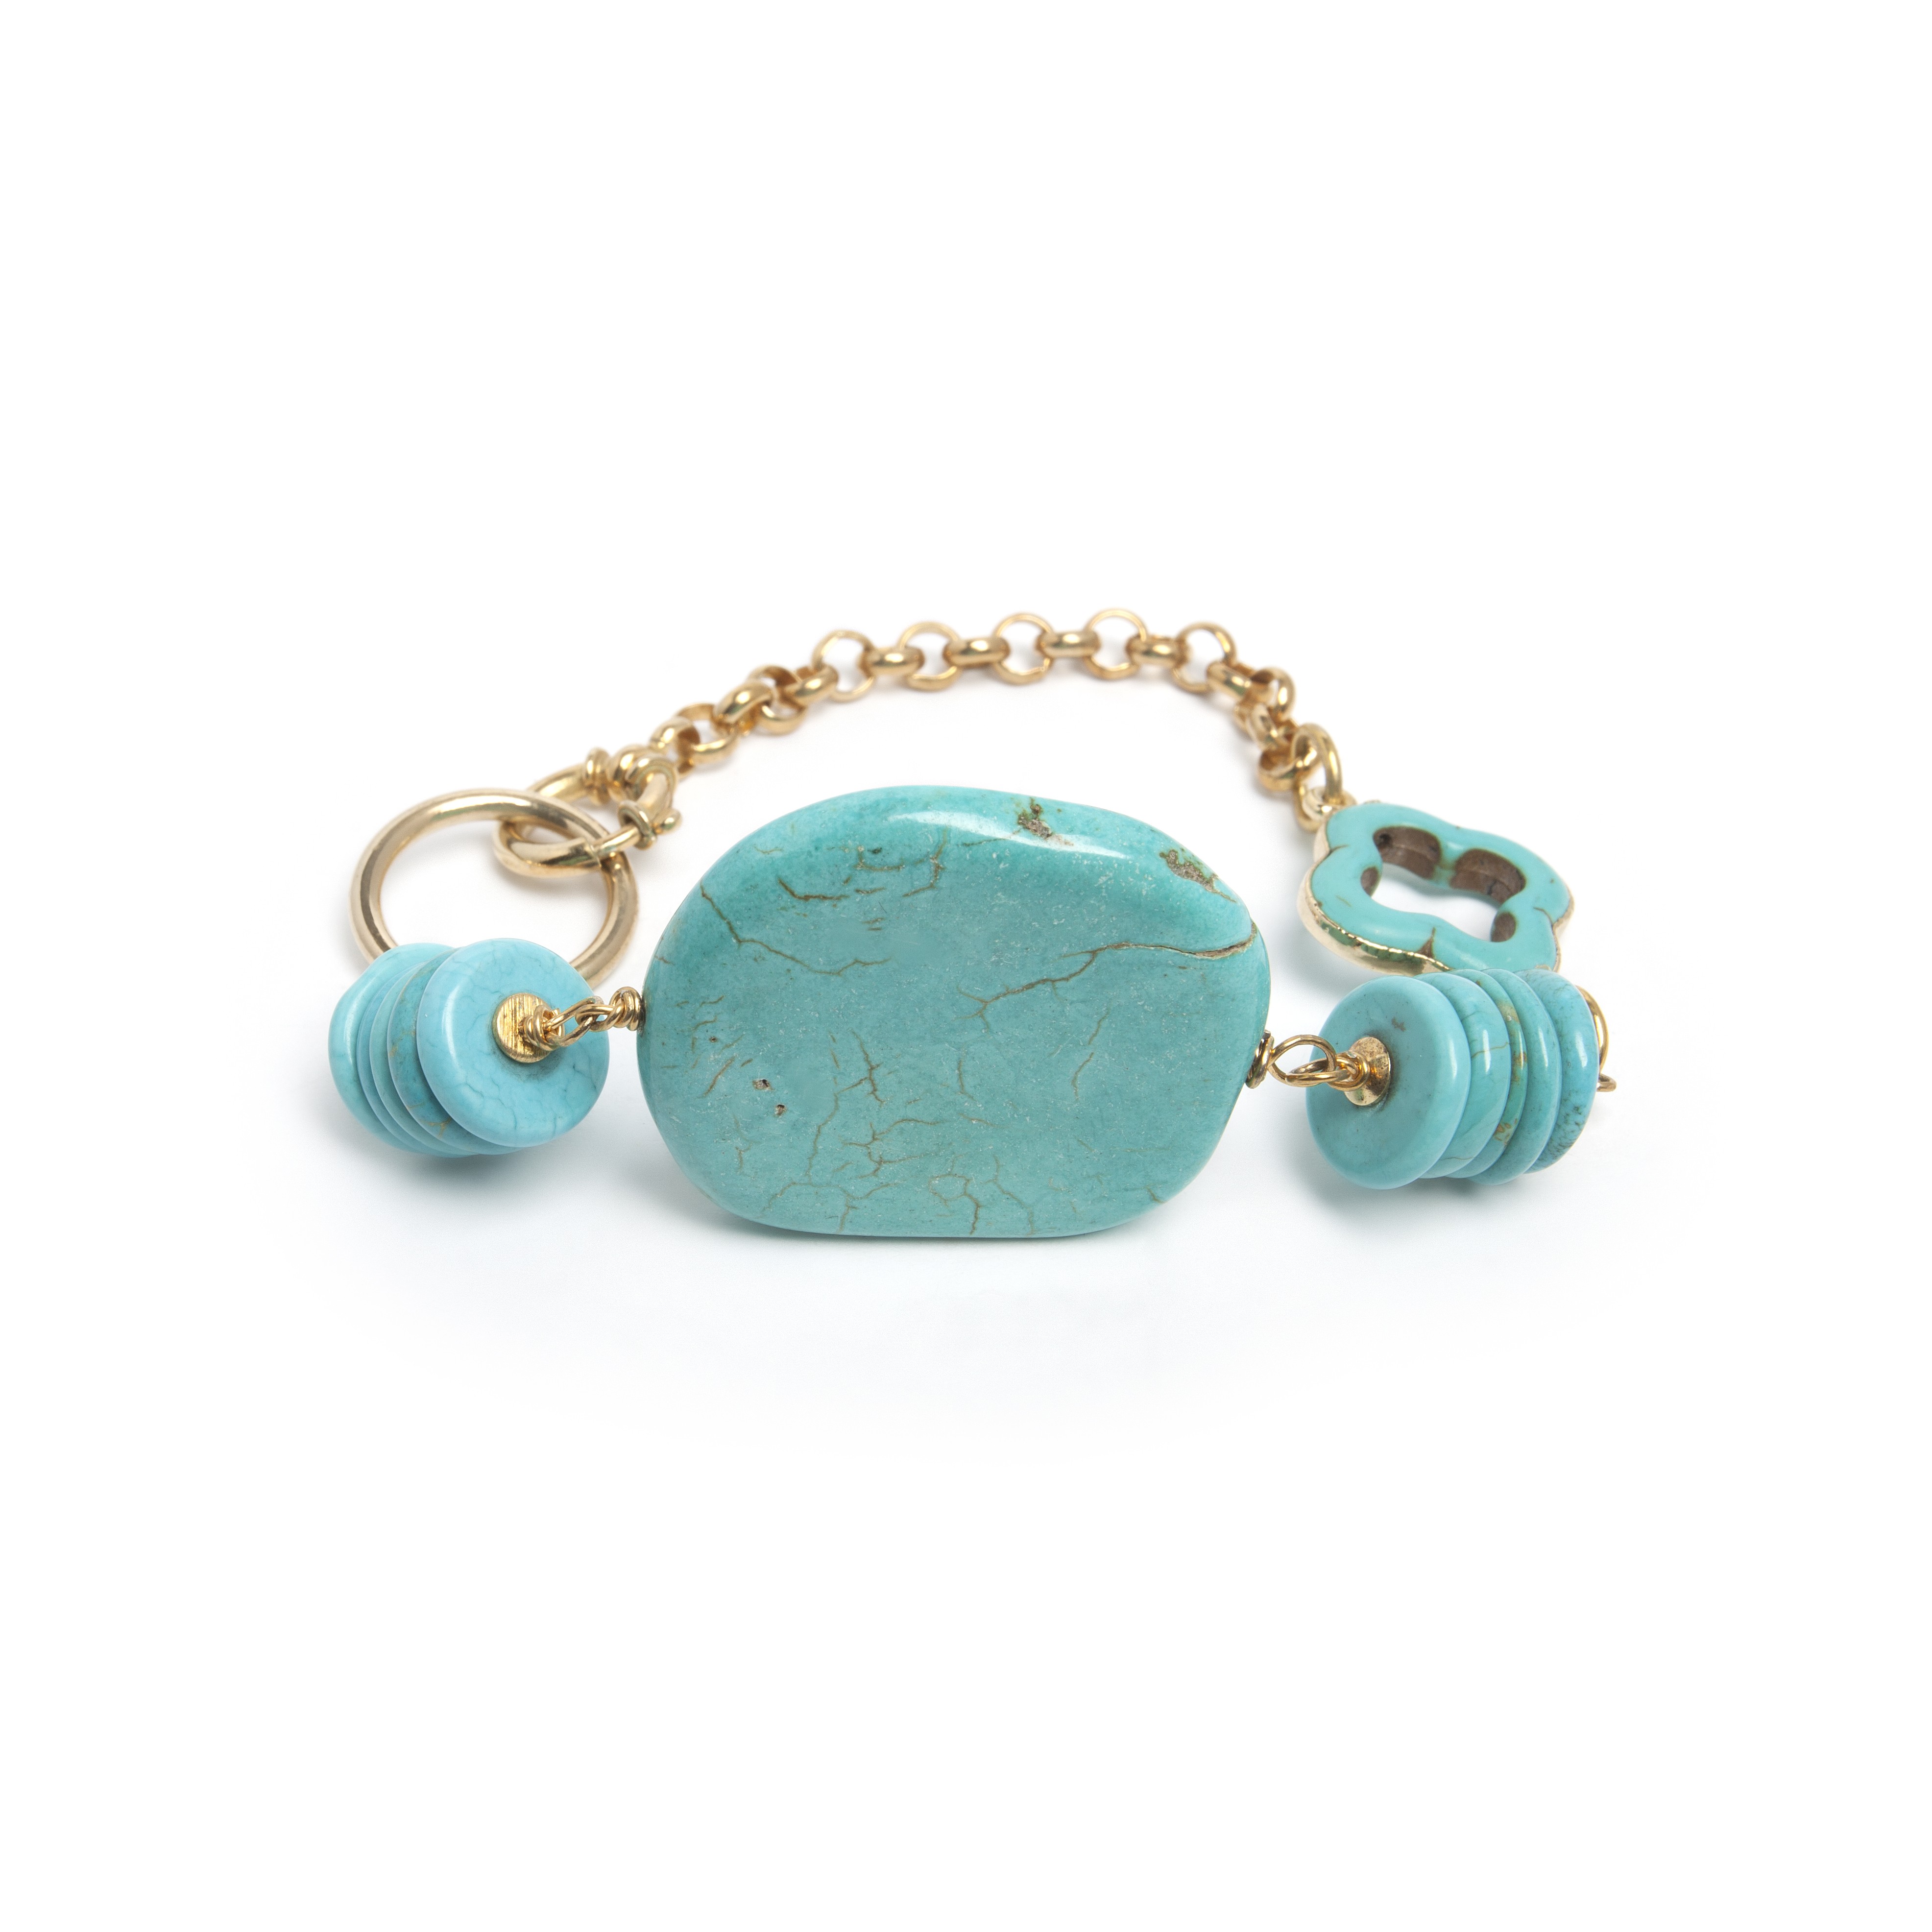 Silver bracelet with Turquoise